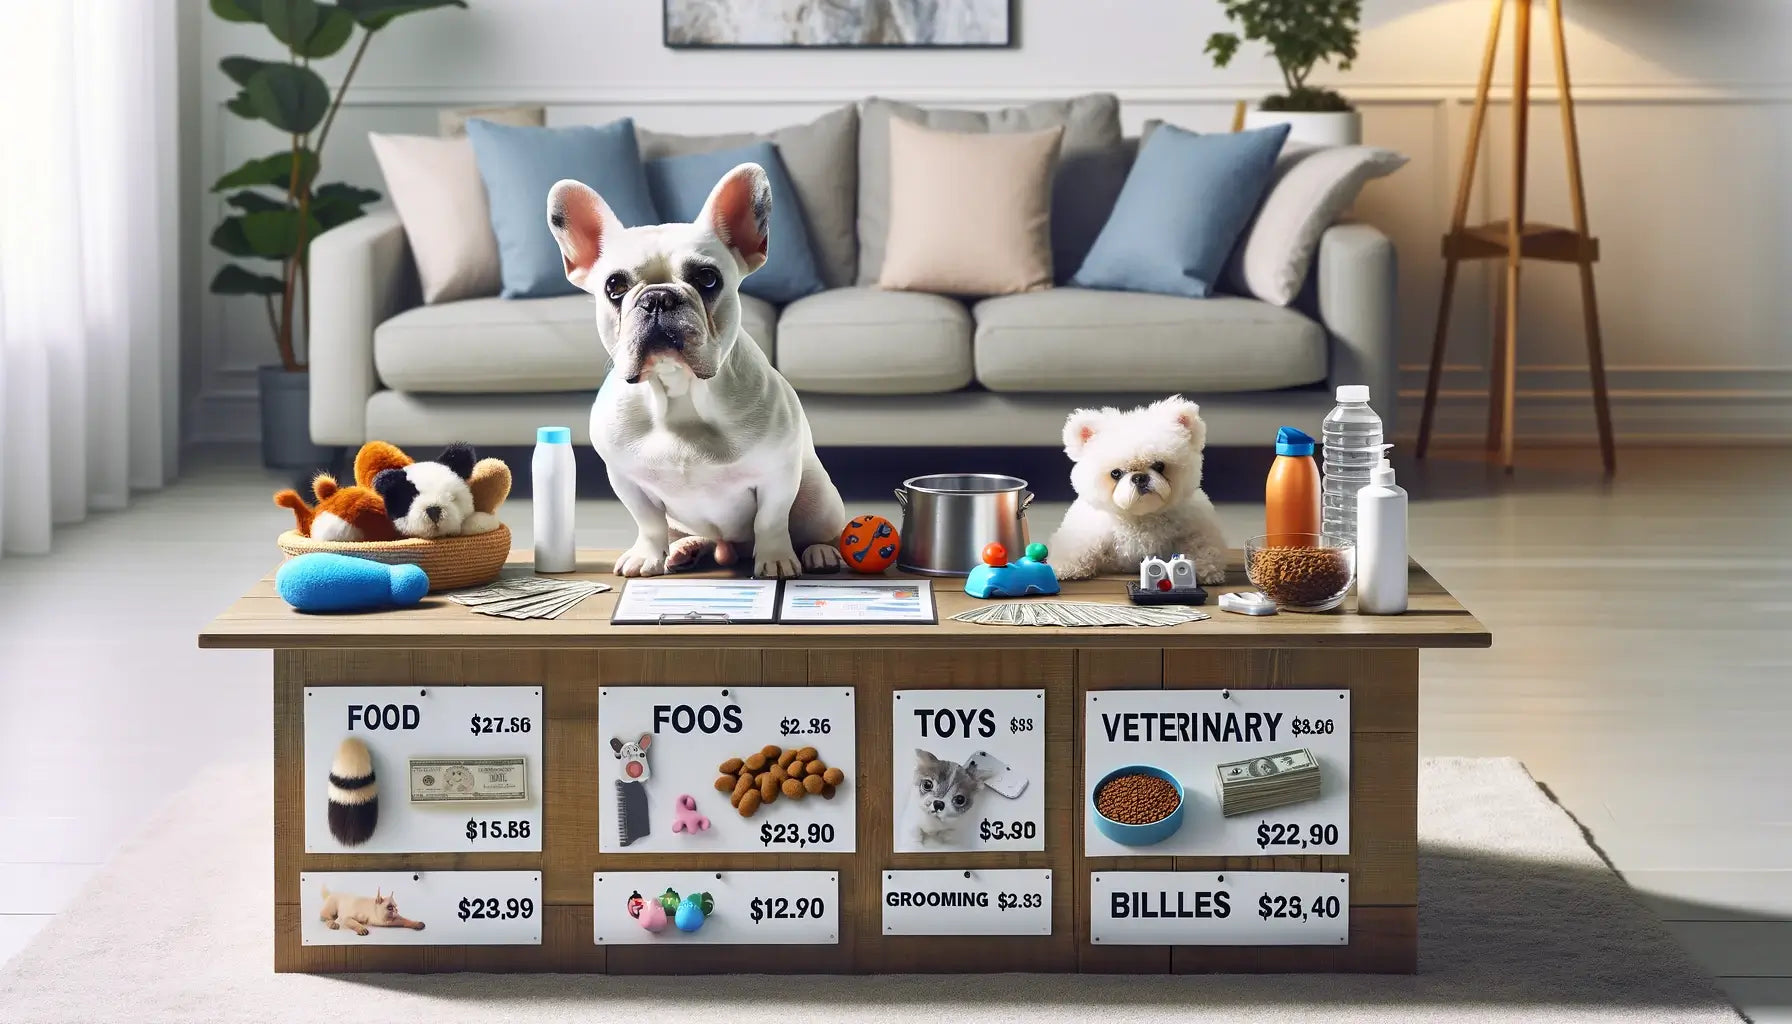 White French Bulldog with the dog sitting next to a table displaying various expenses.